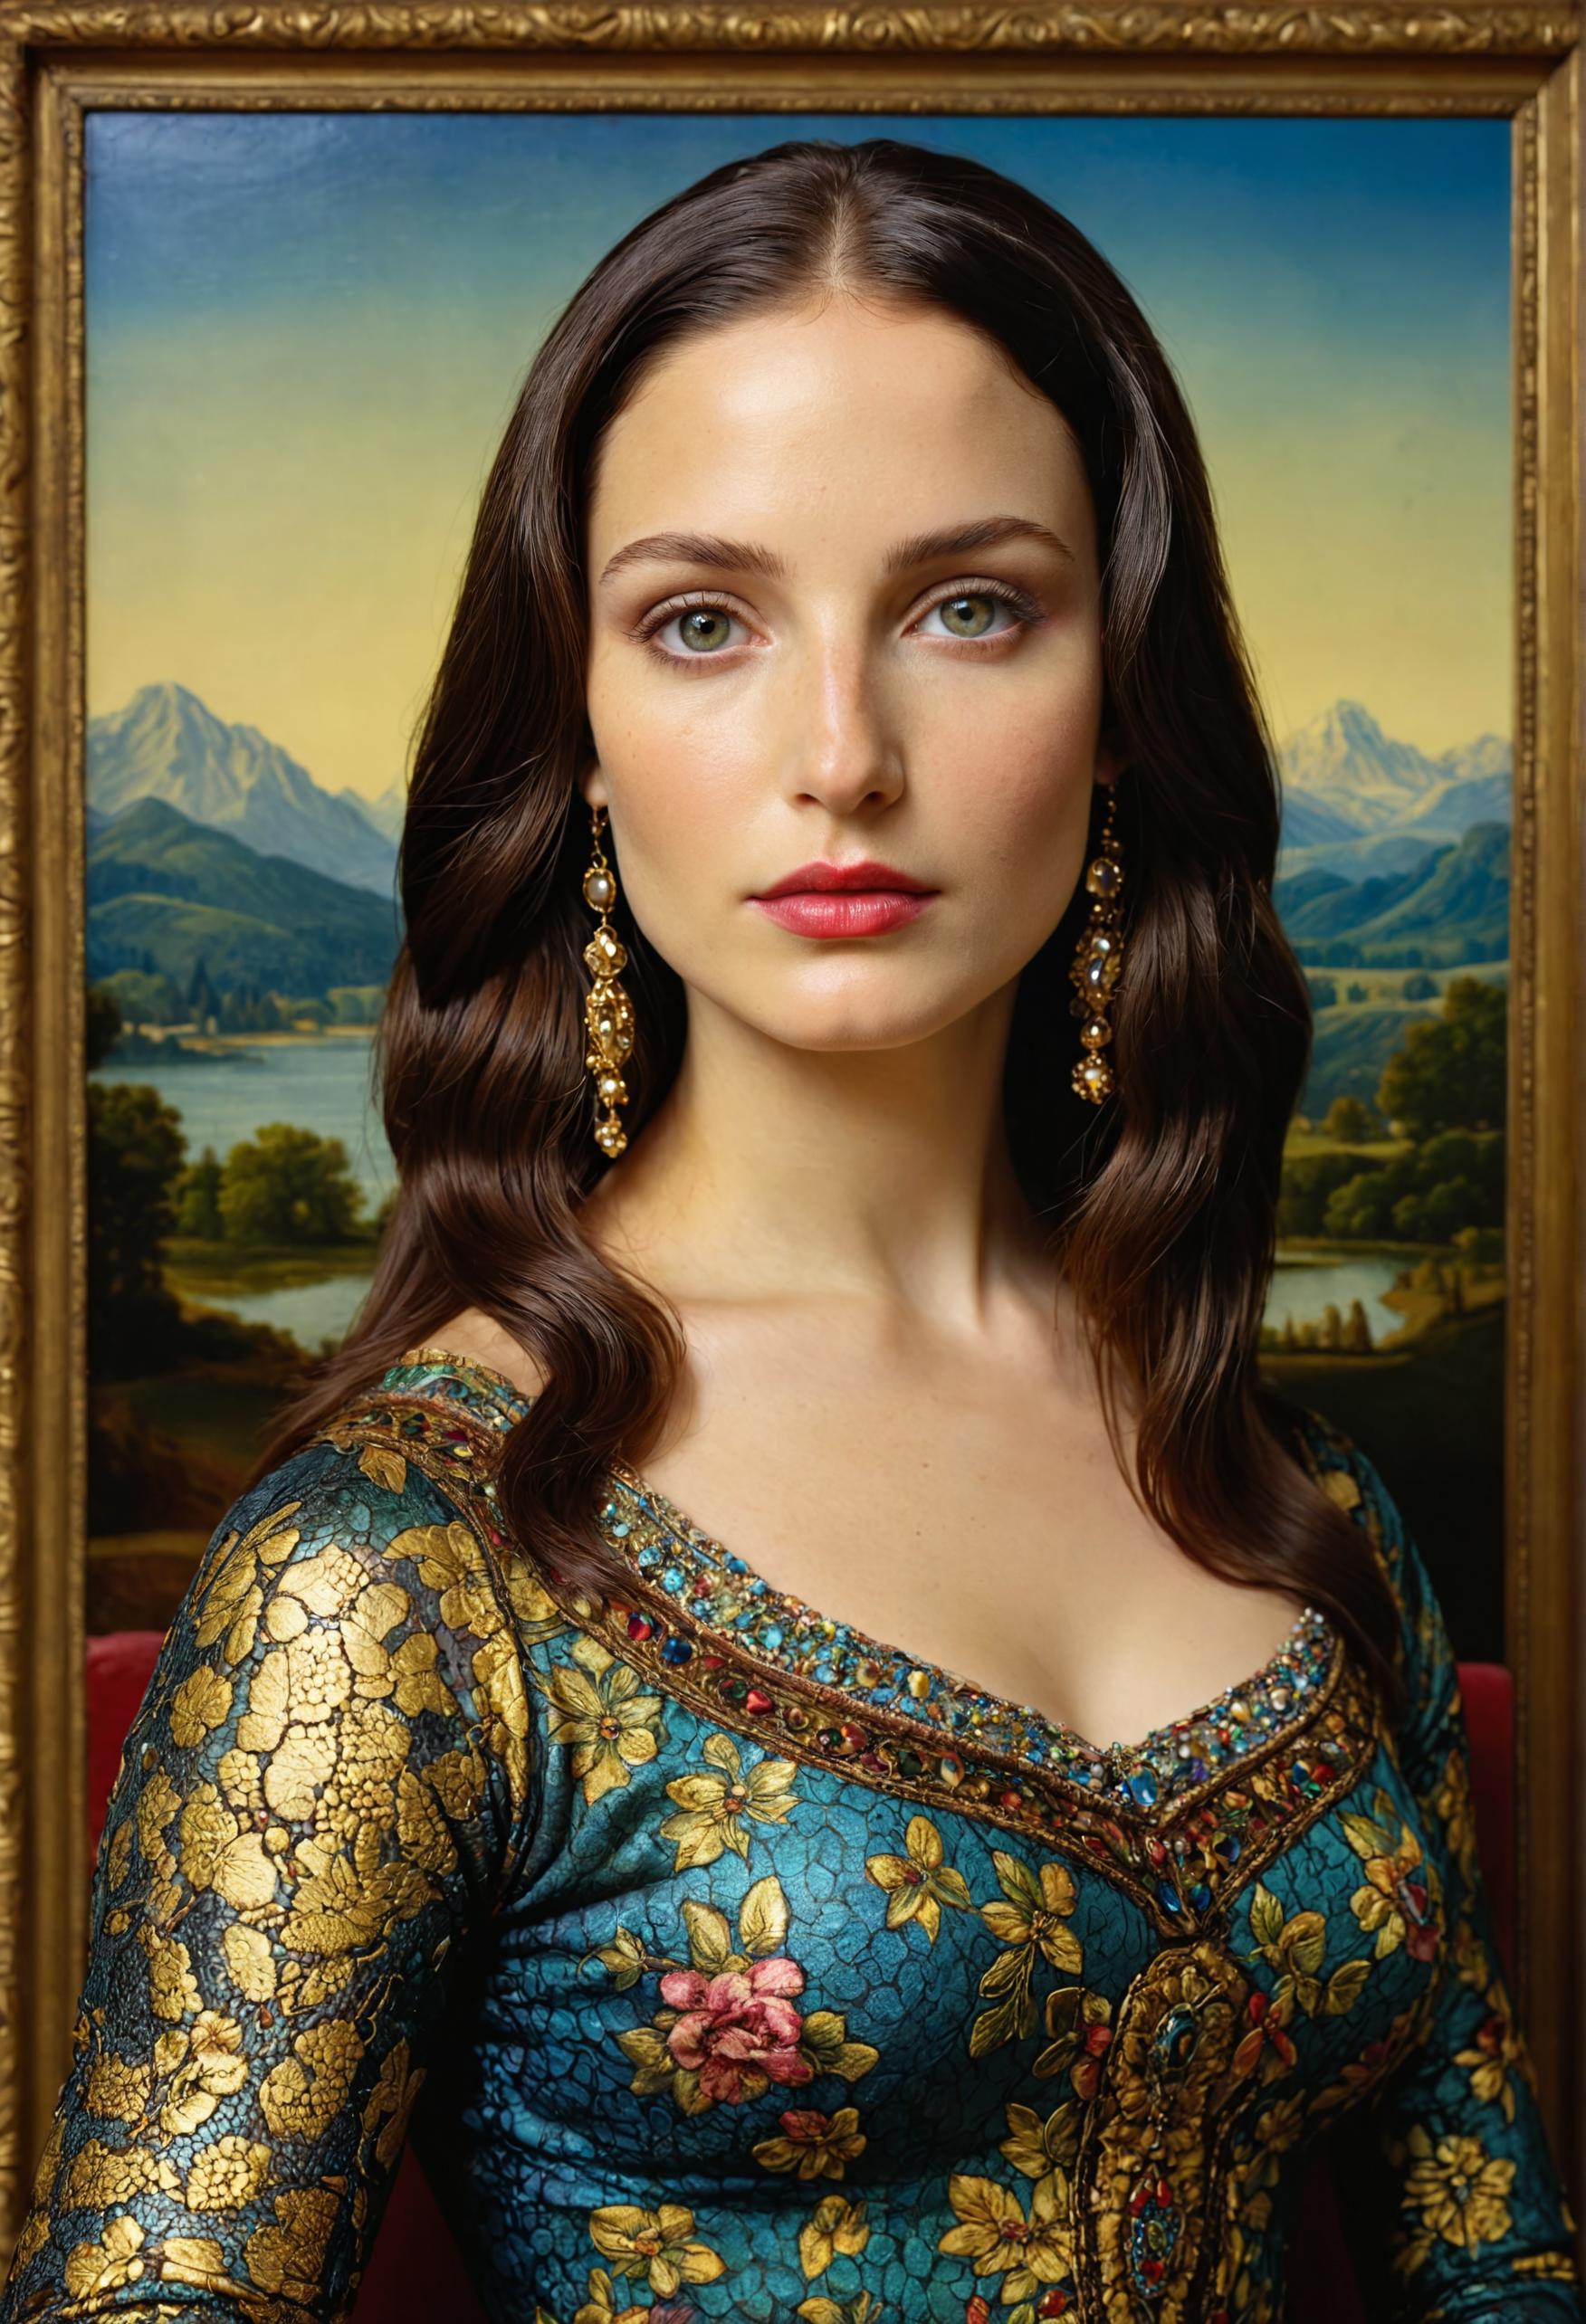 47 Unexpected Versions Of The Mona Lisa Reimagined By Digital Artists |  Bored Panda